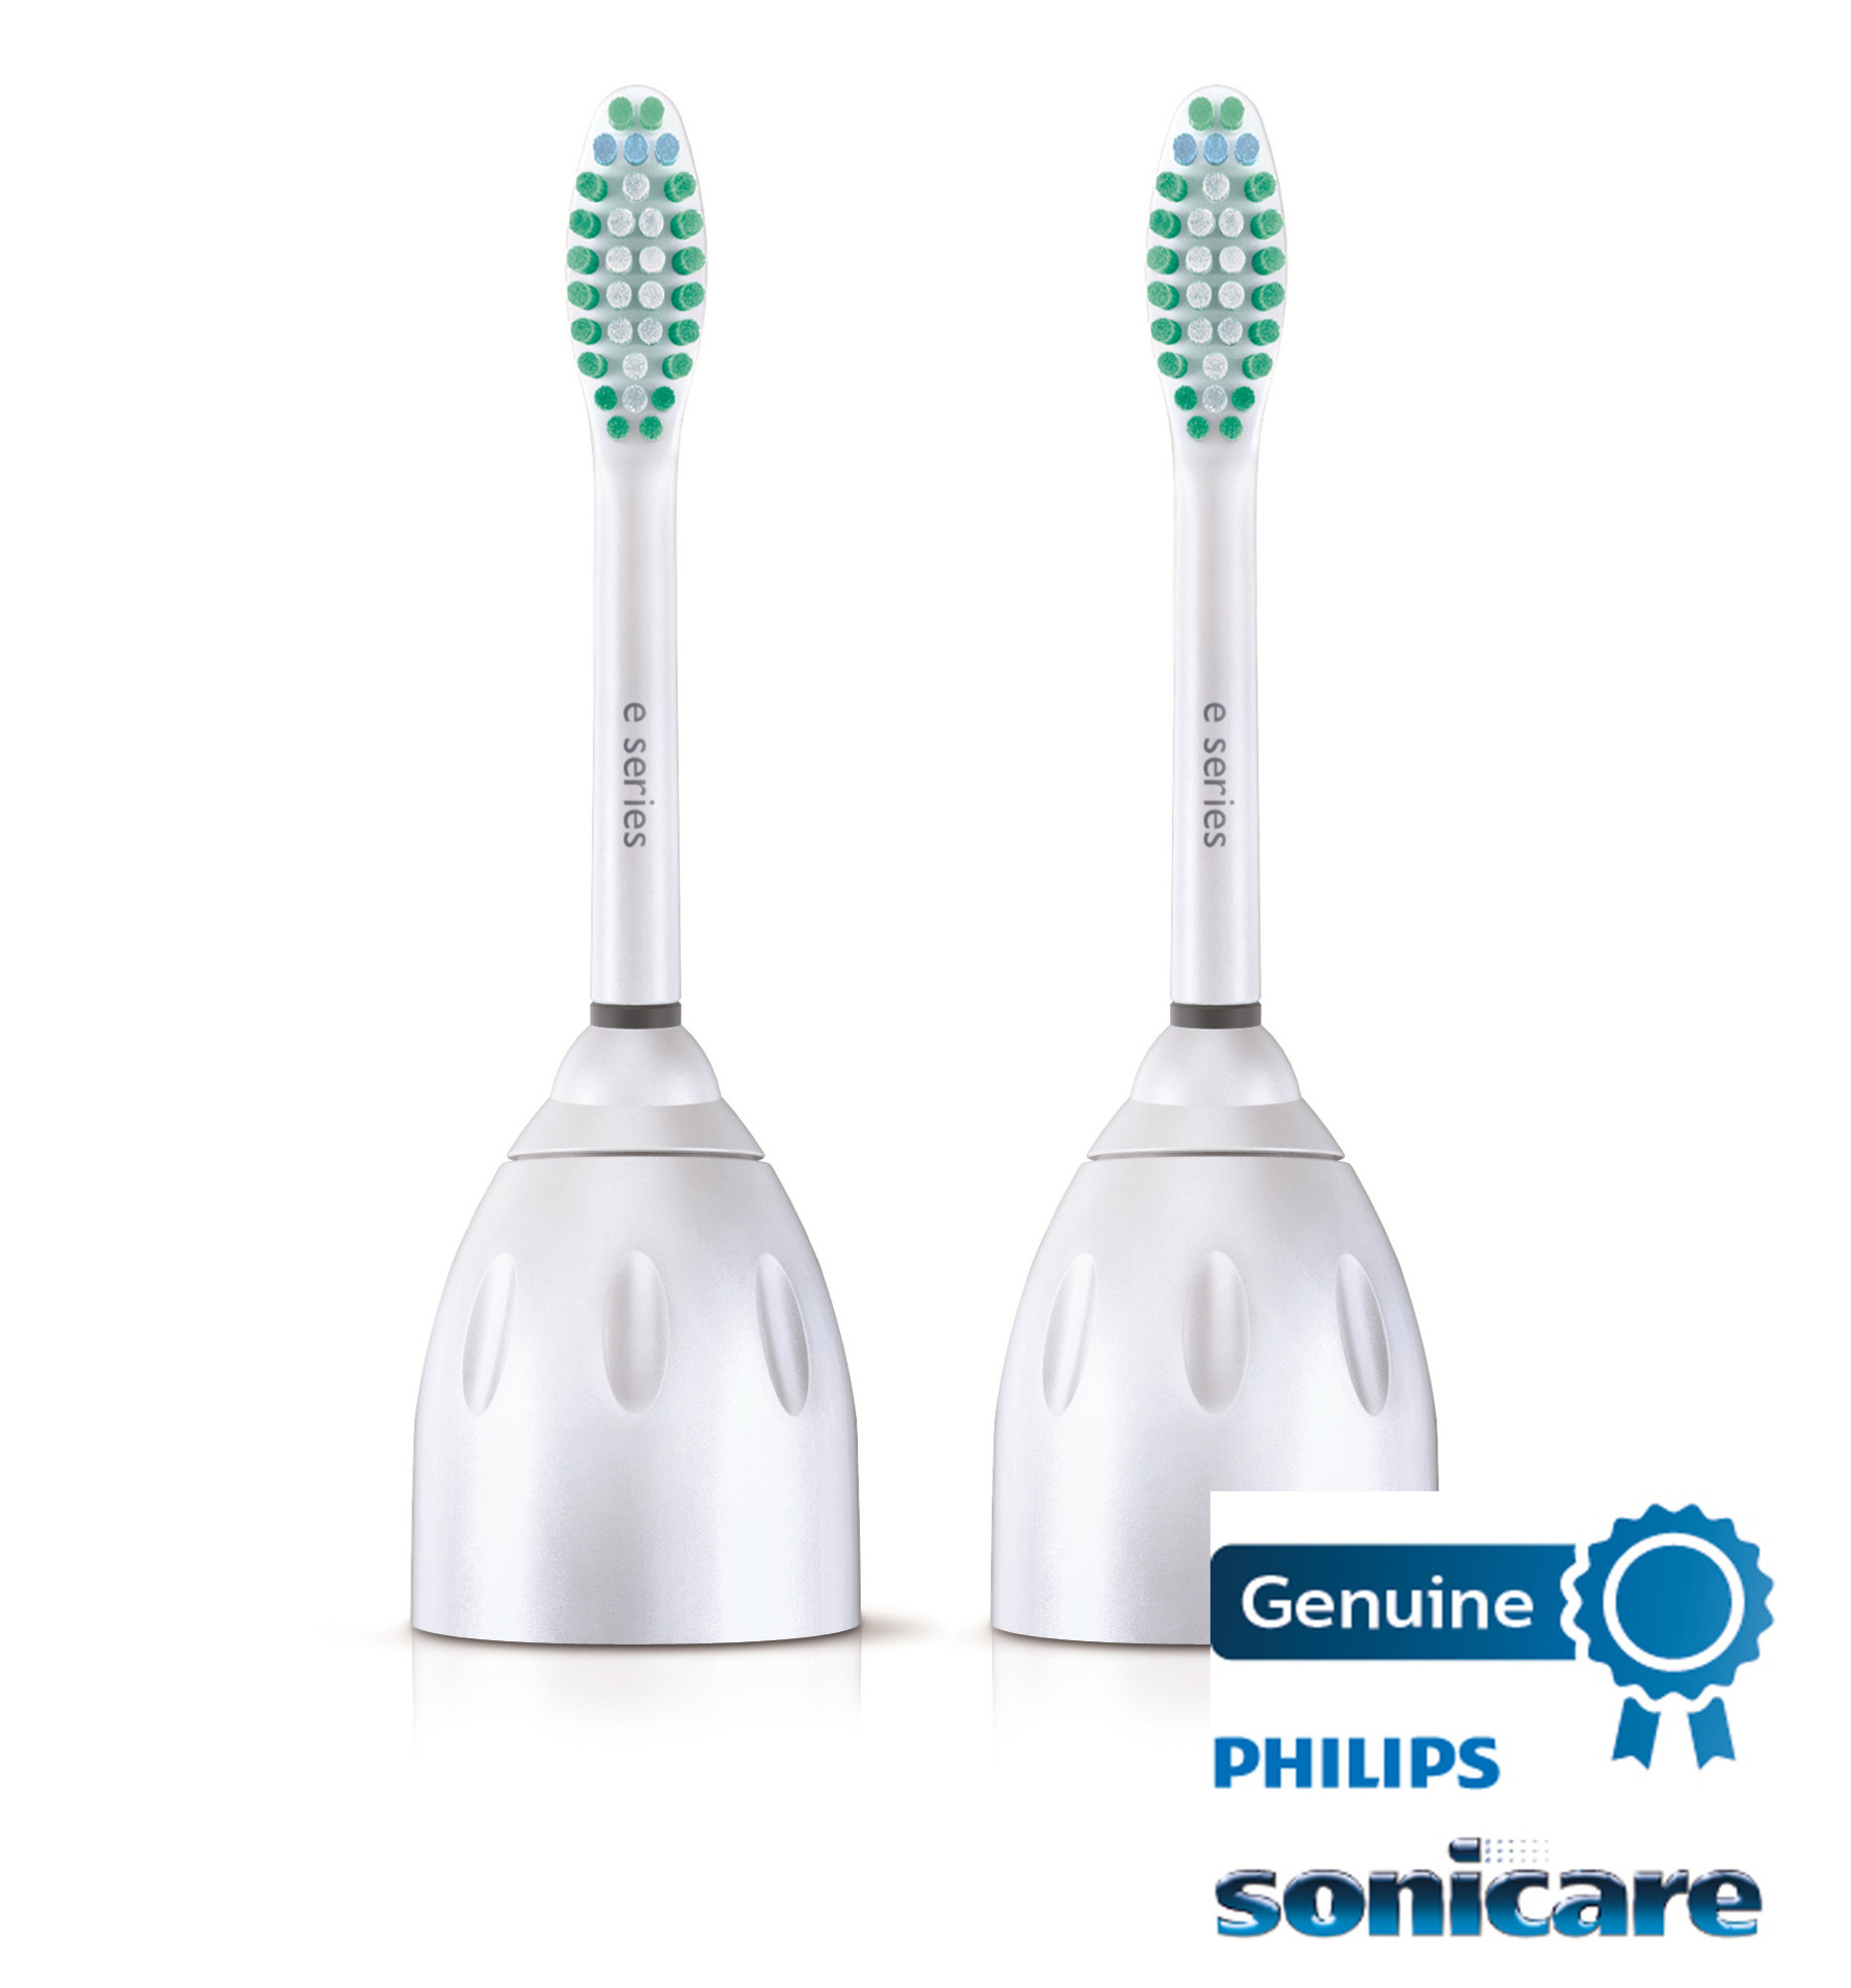 Philips Sonicare E-Series Replacement Toothbrush Heads, HX7022/66, 2-pk - image 4 of 7